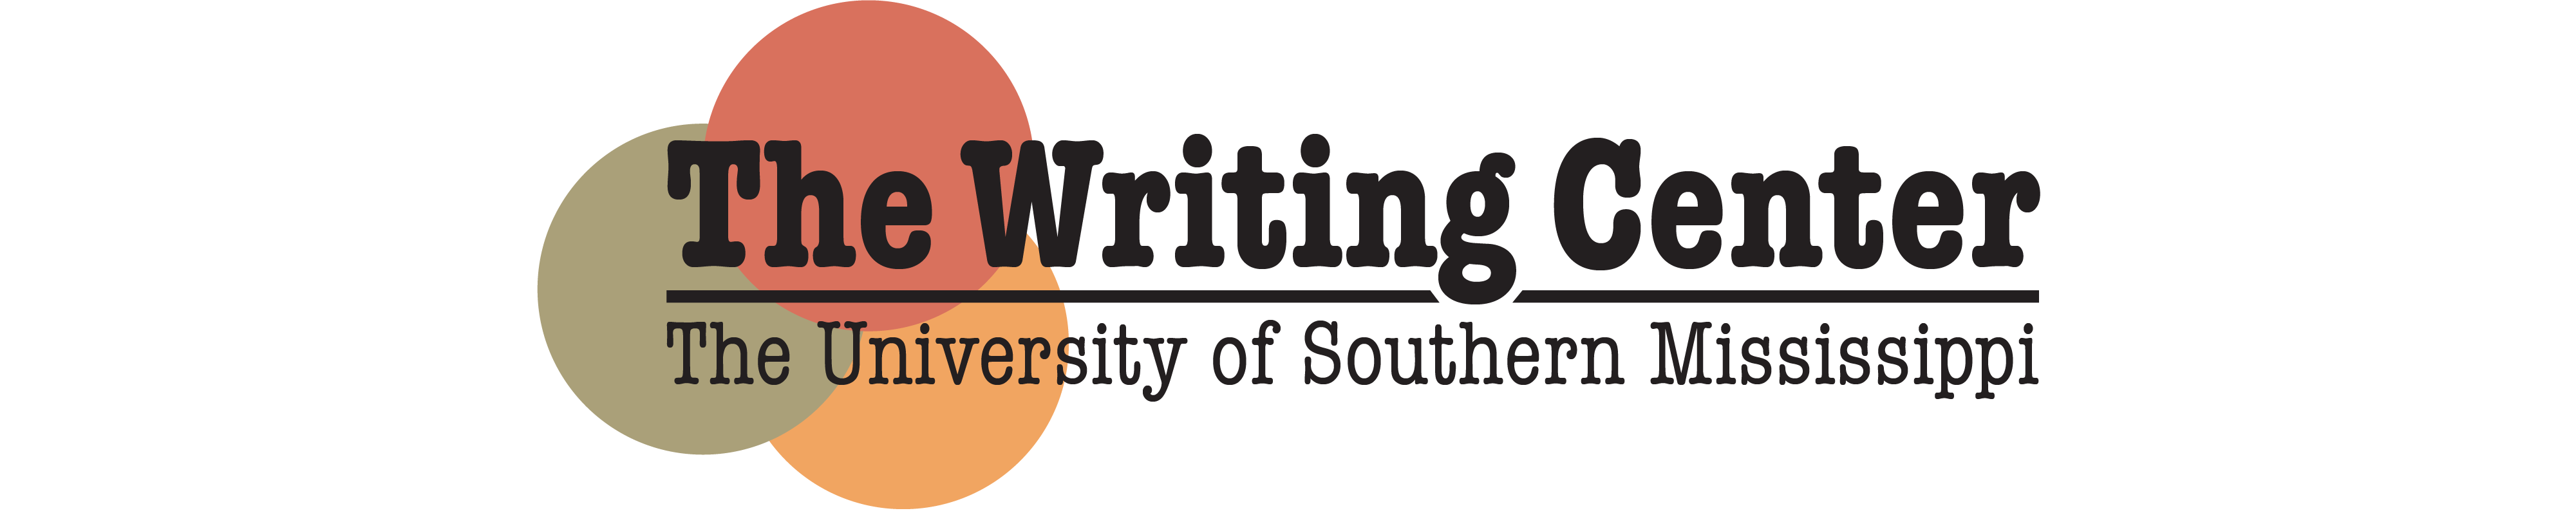 The Writing Center Banner